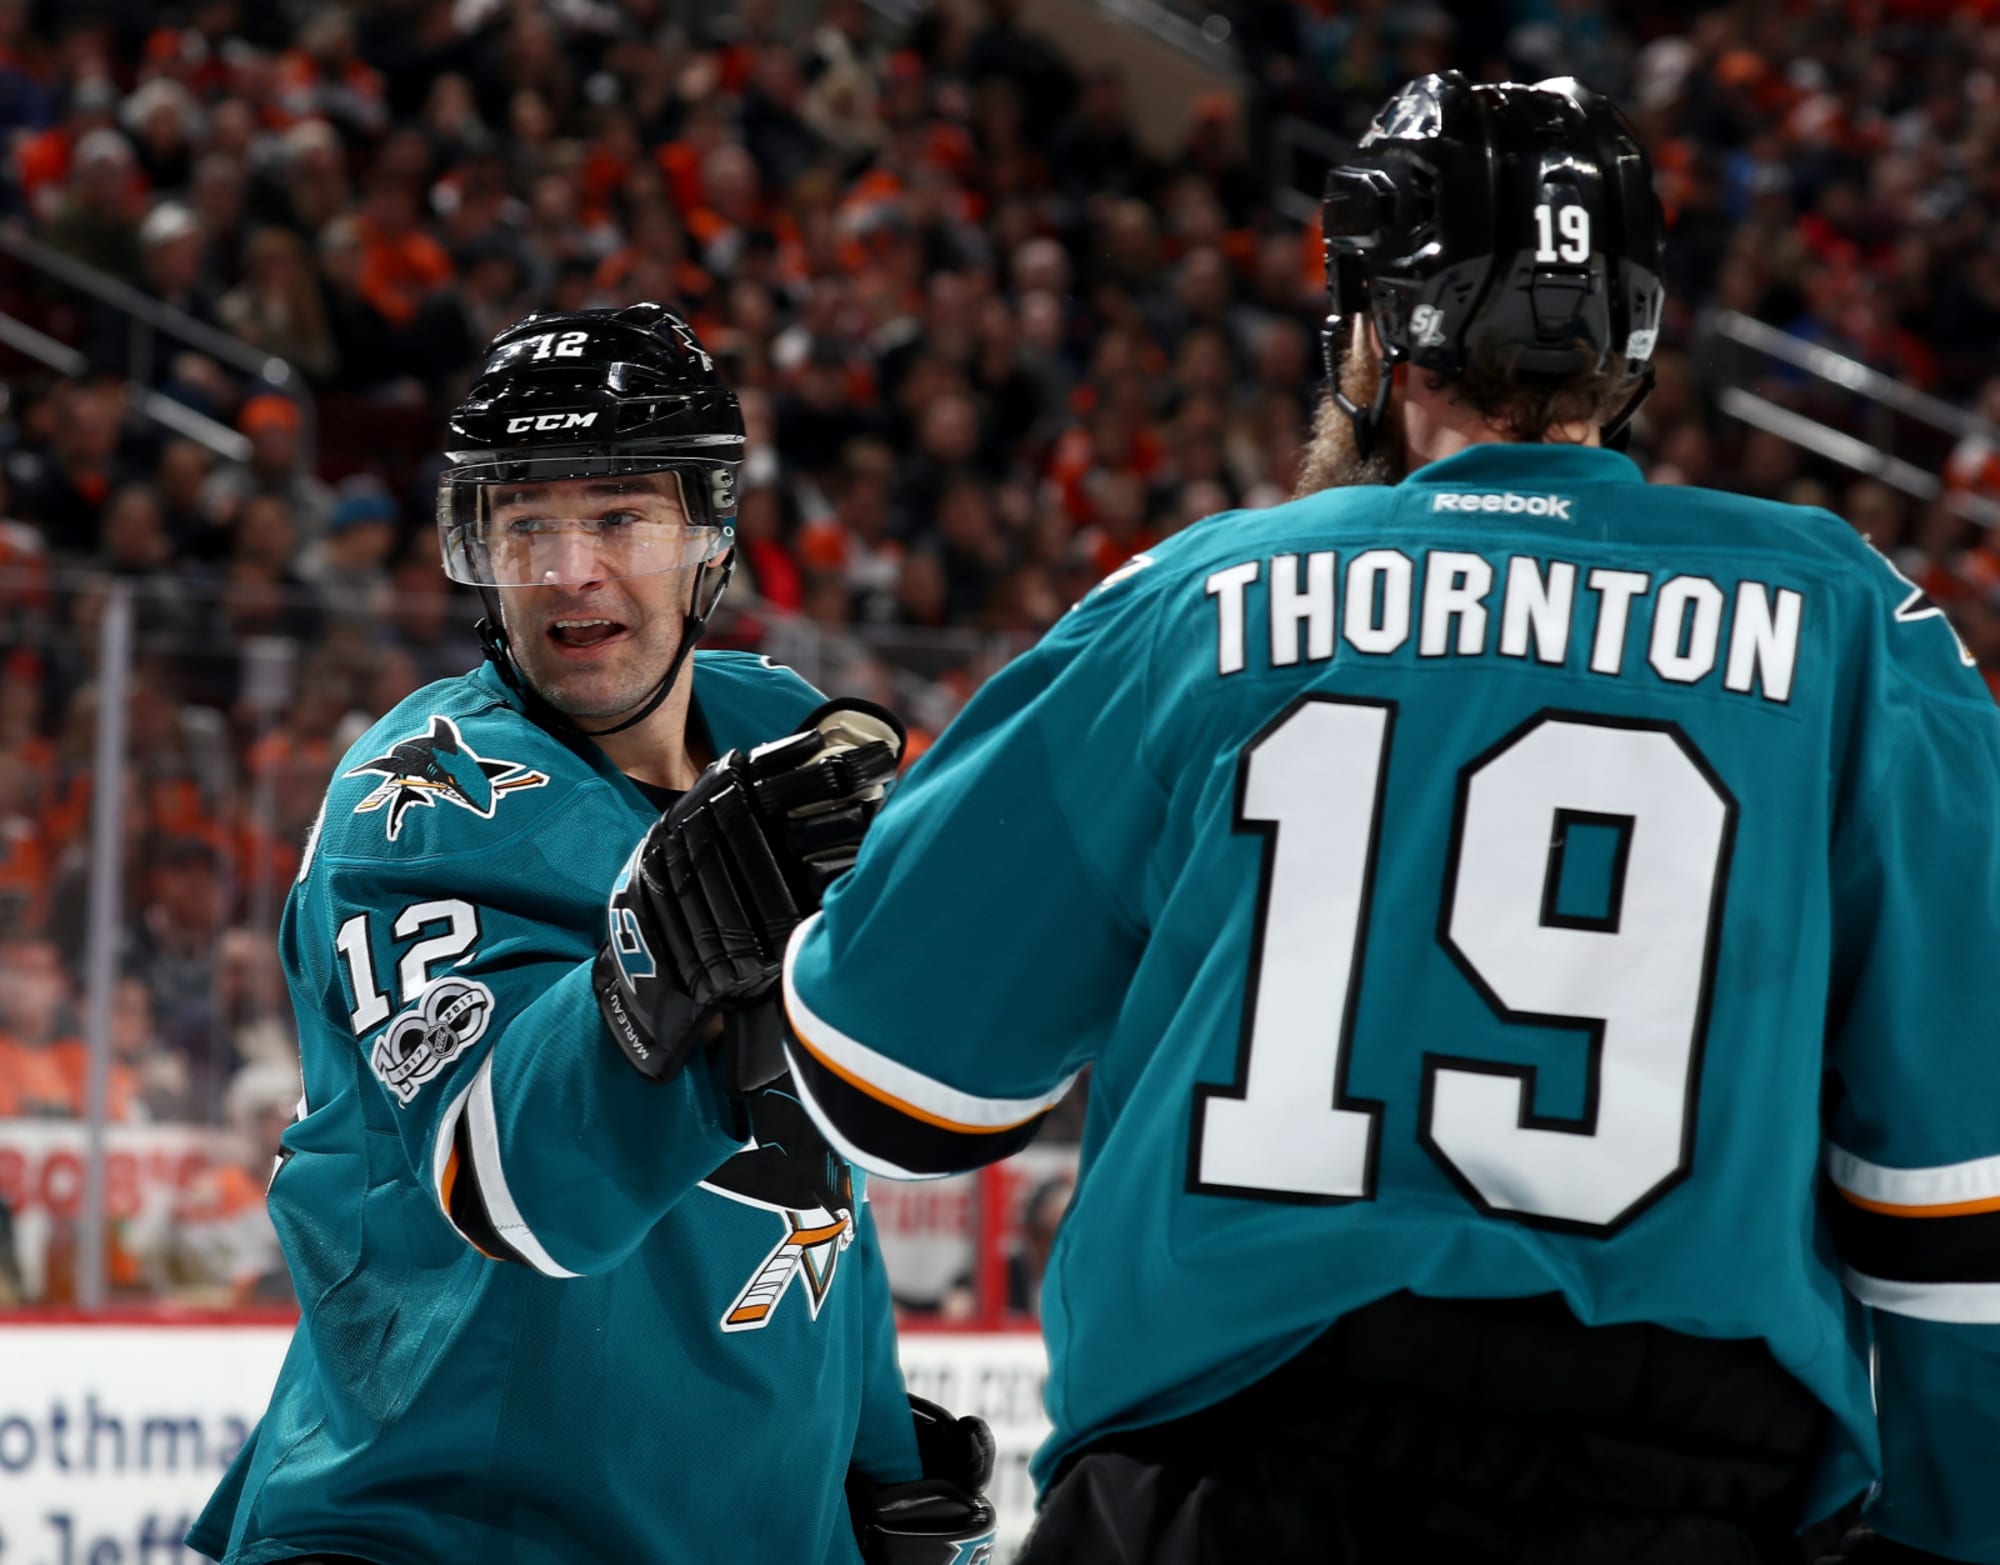 Sharks forward Patrick Marleau ties record for NHL games played